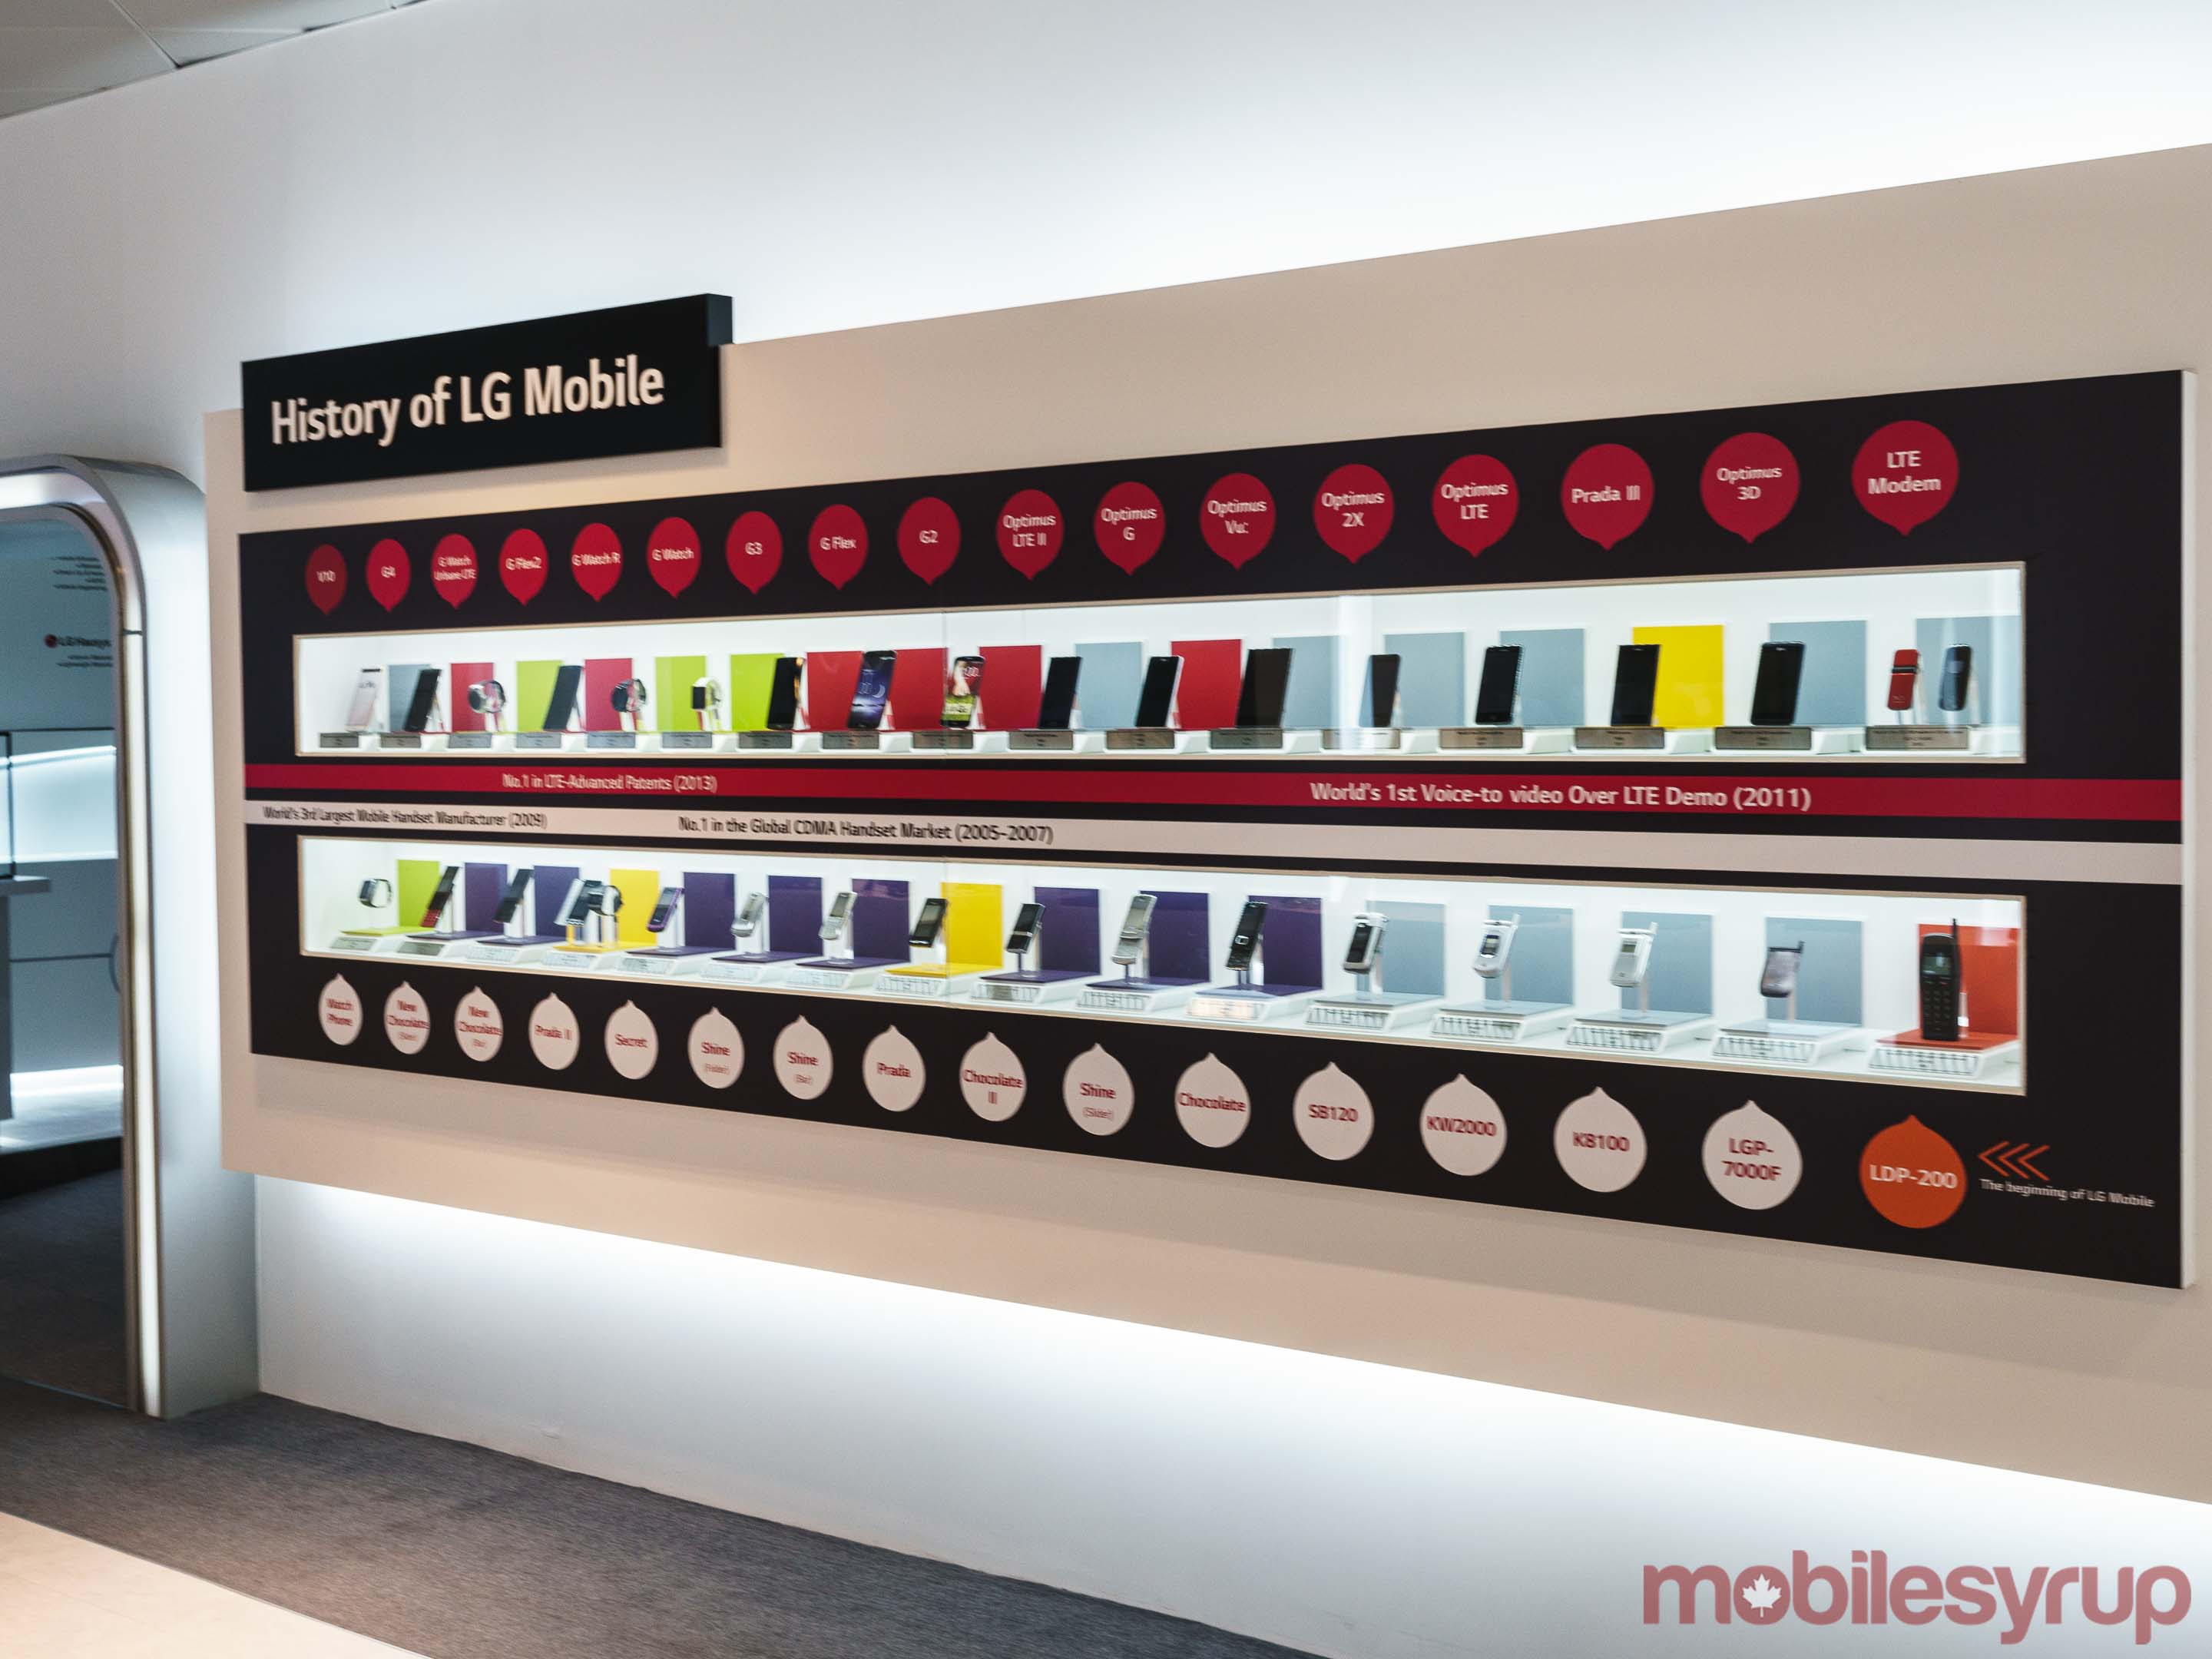 LG's wall of mobile history